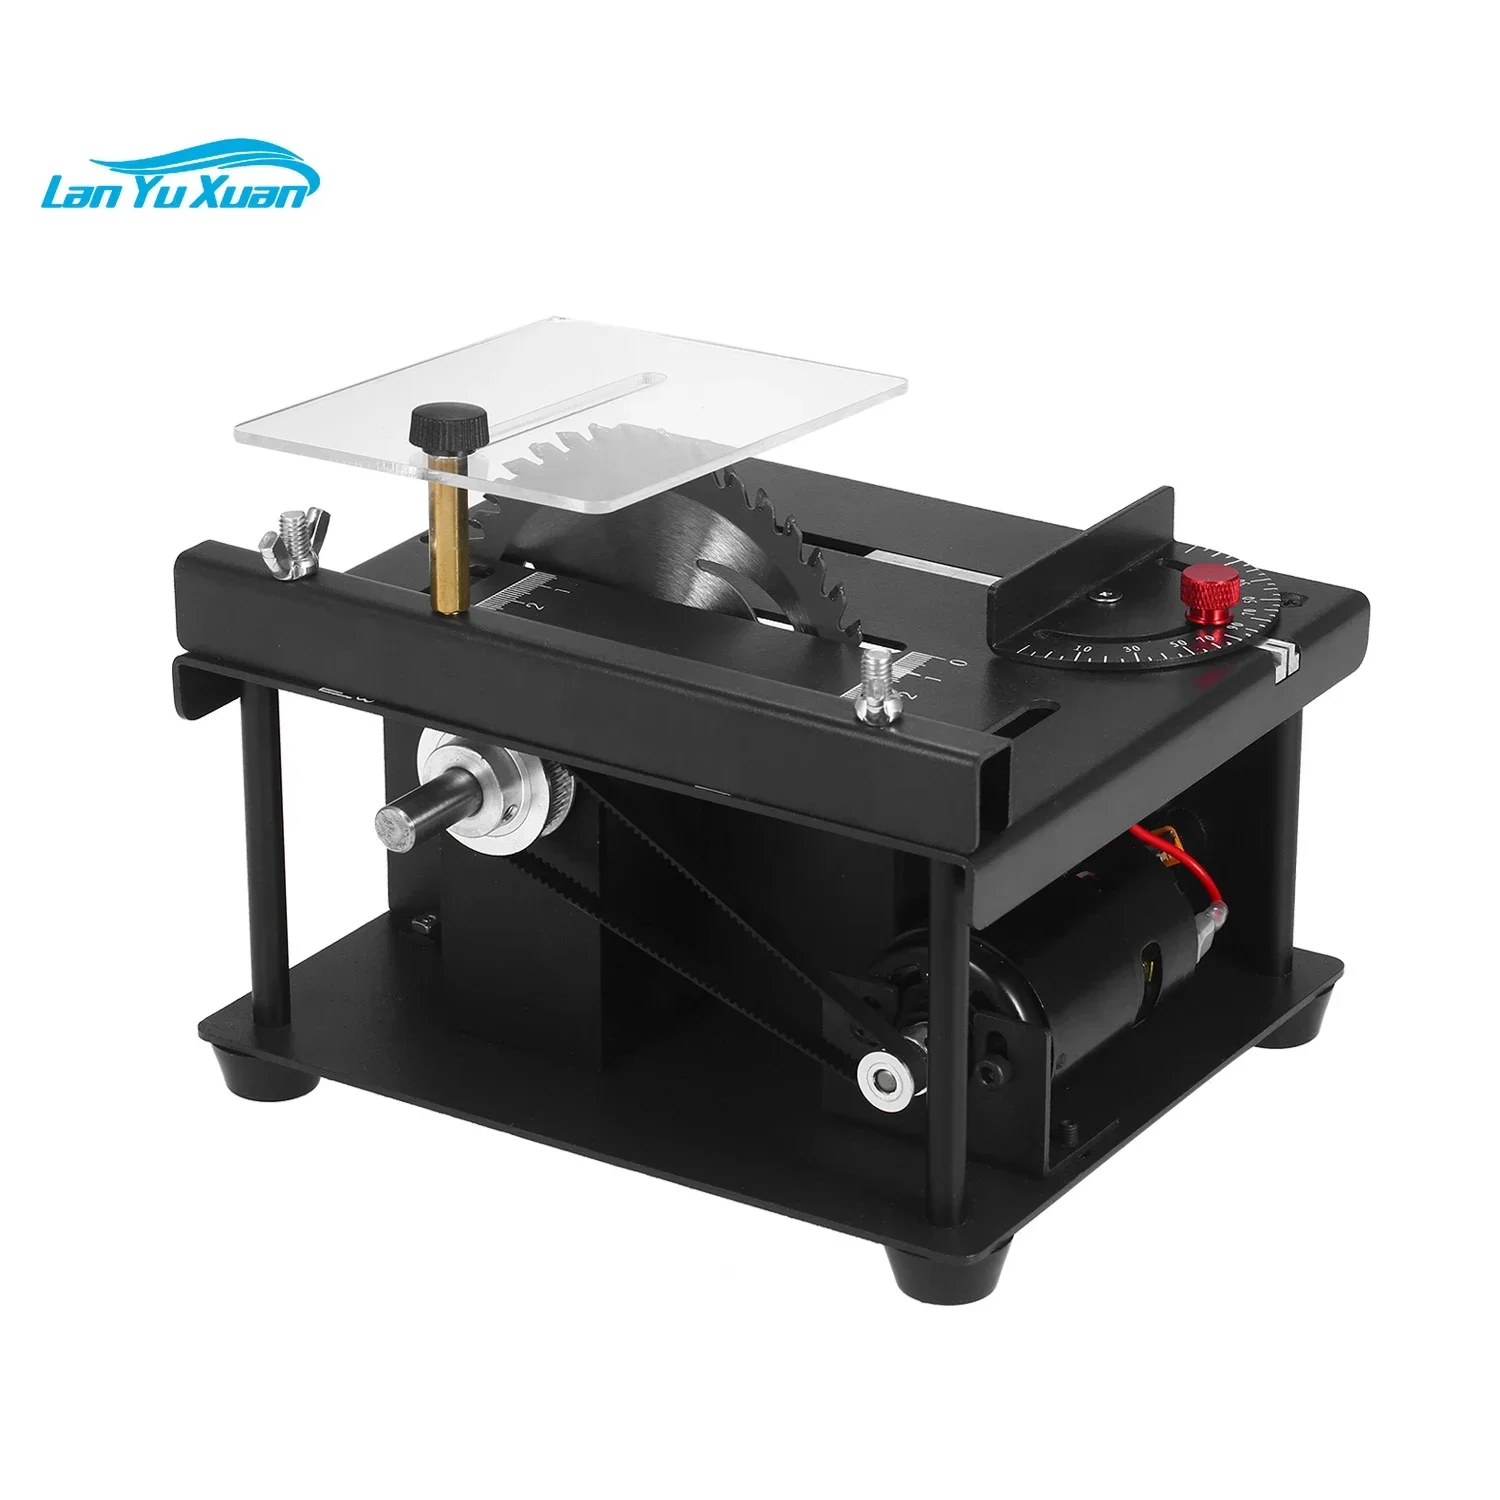 

Table Saw Mini Desktop Cutter Electric Cutting Machine with Blade Adjustable-Speed Angle Adjustment 35MM Depth